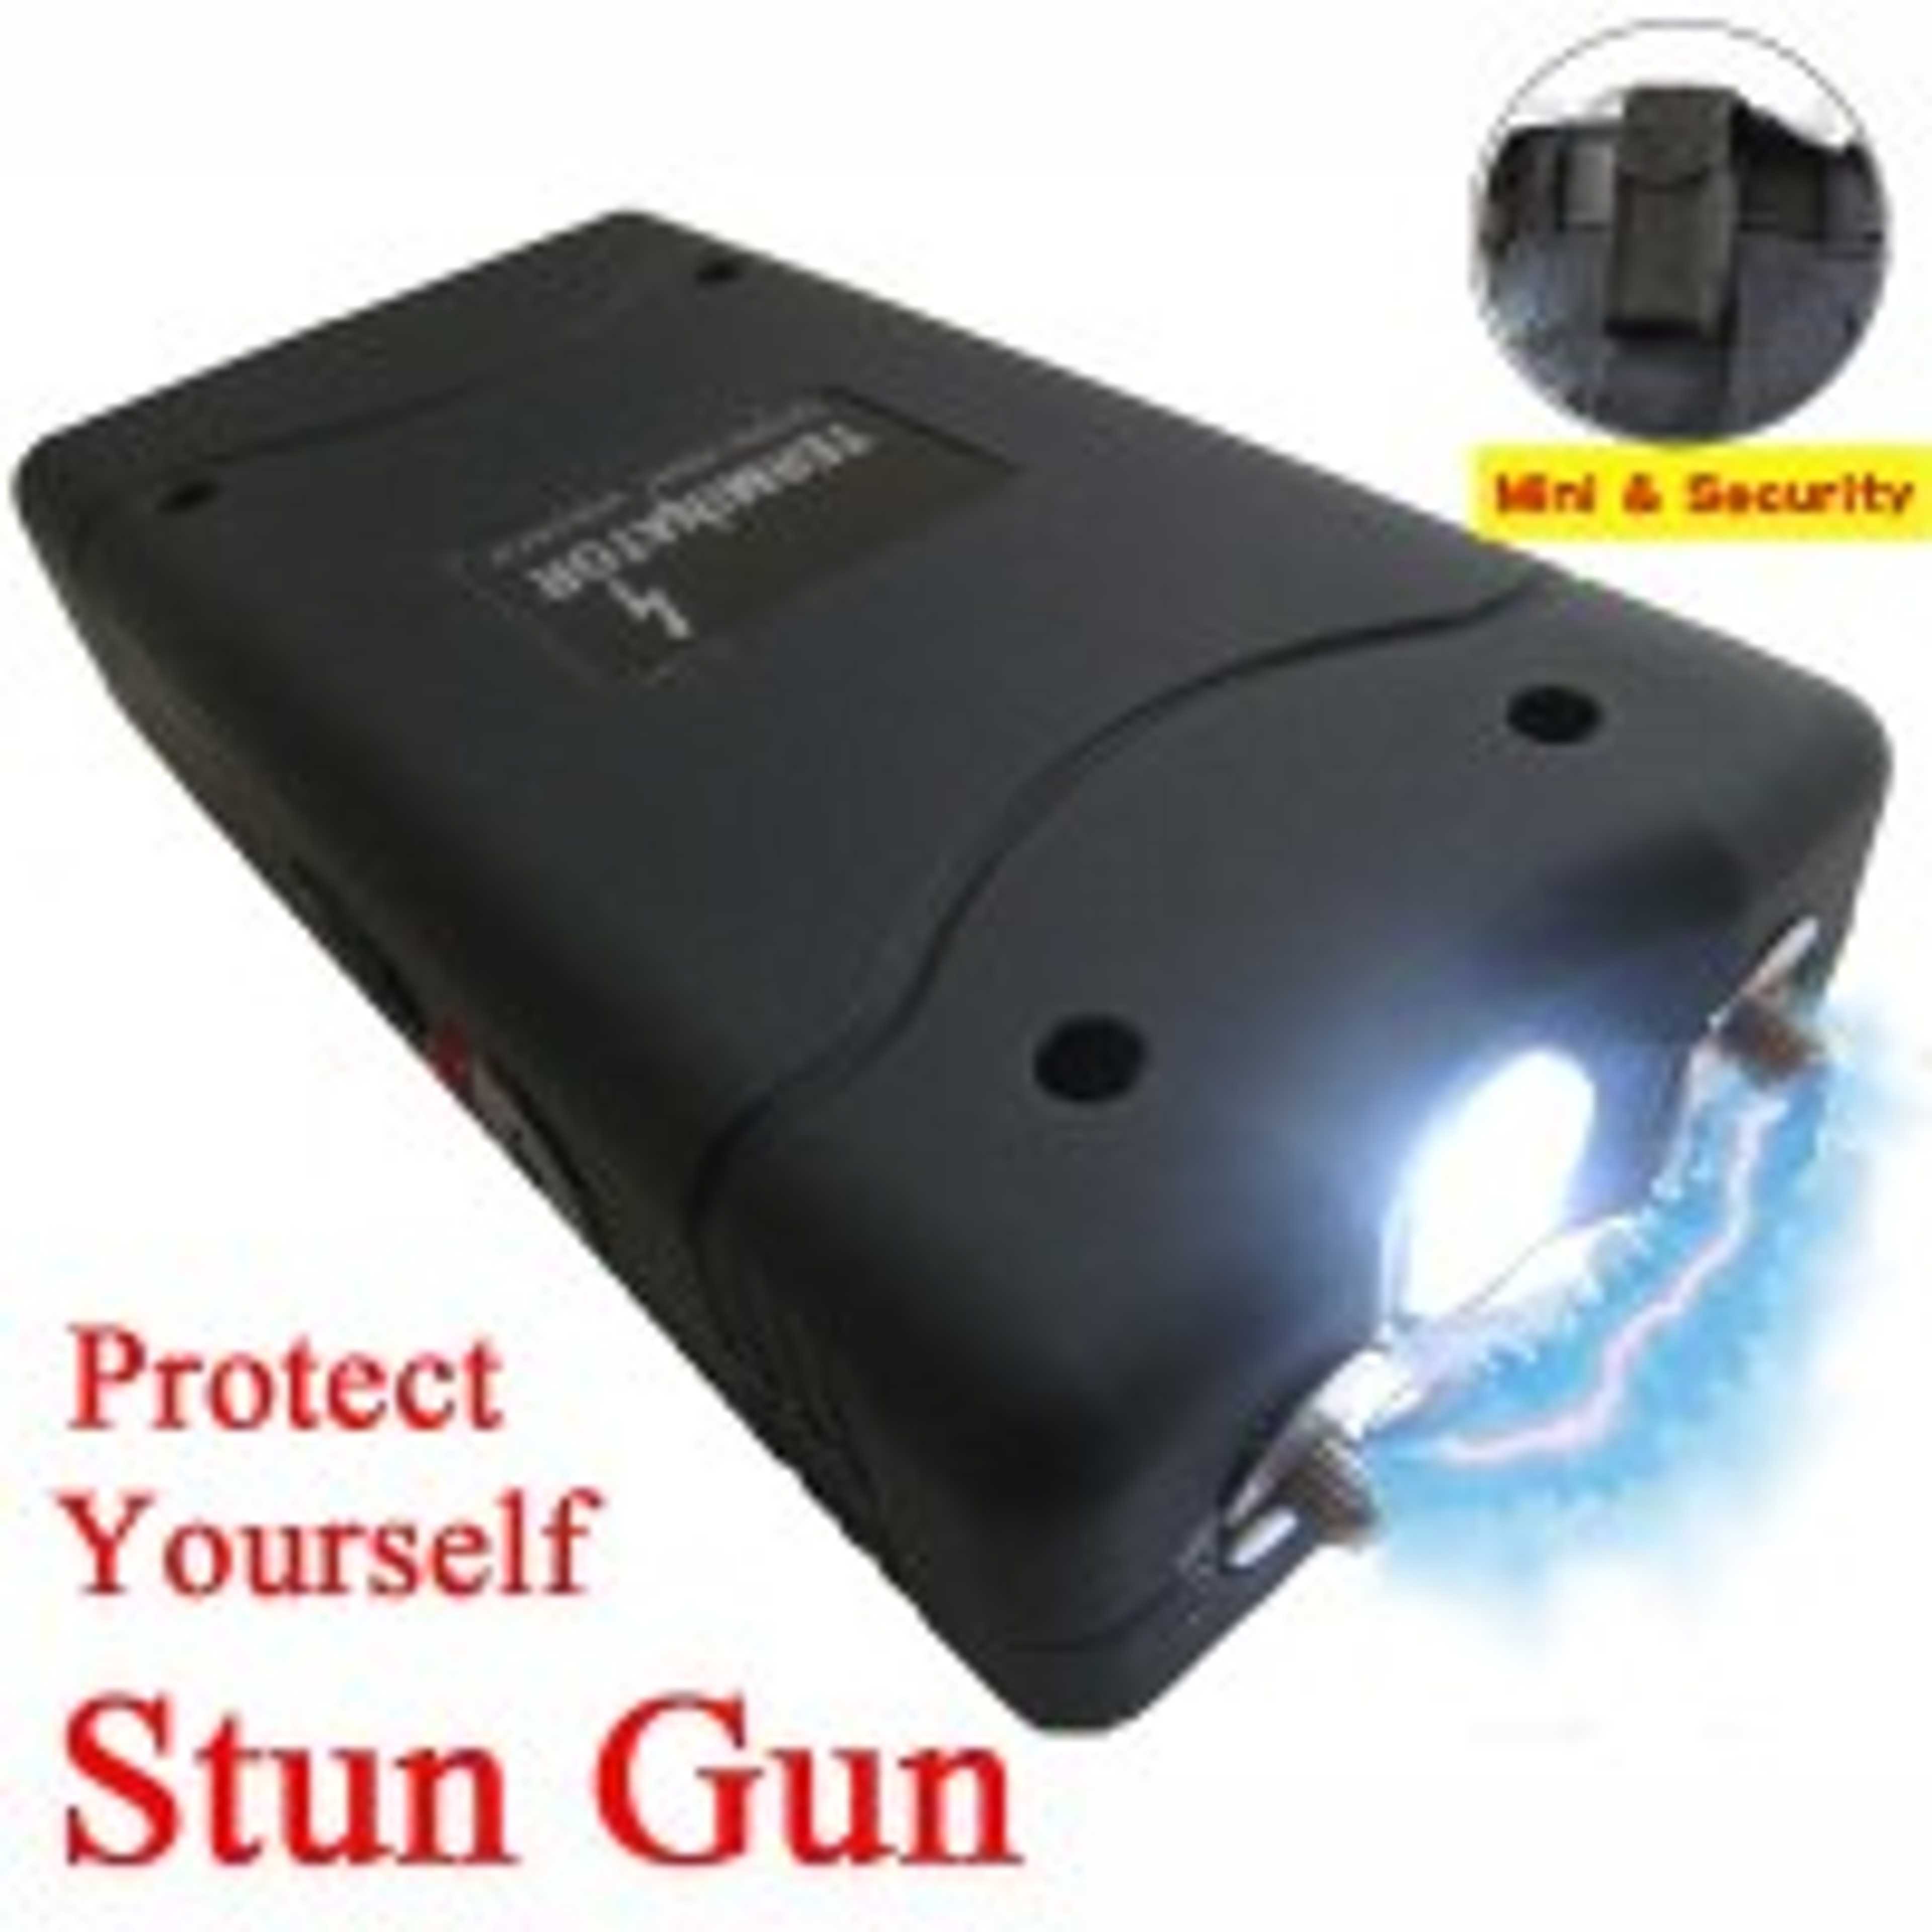 Led flashlight shock auto defense torch rechargeable light safety lamp protect 800 1101 flashlight adult only